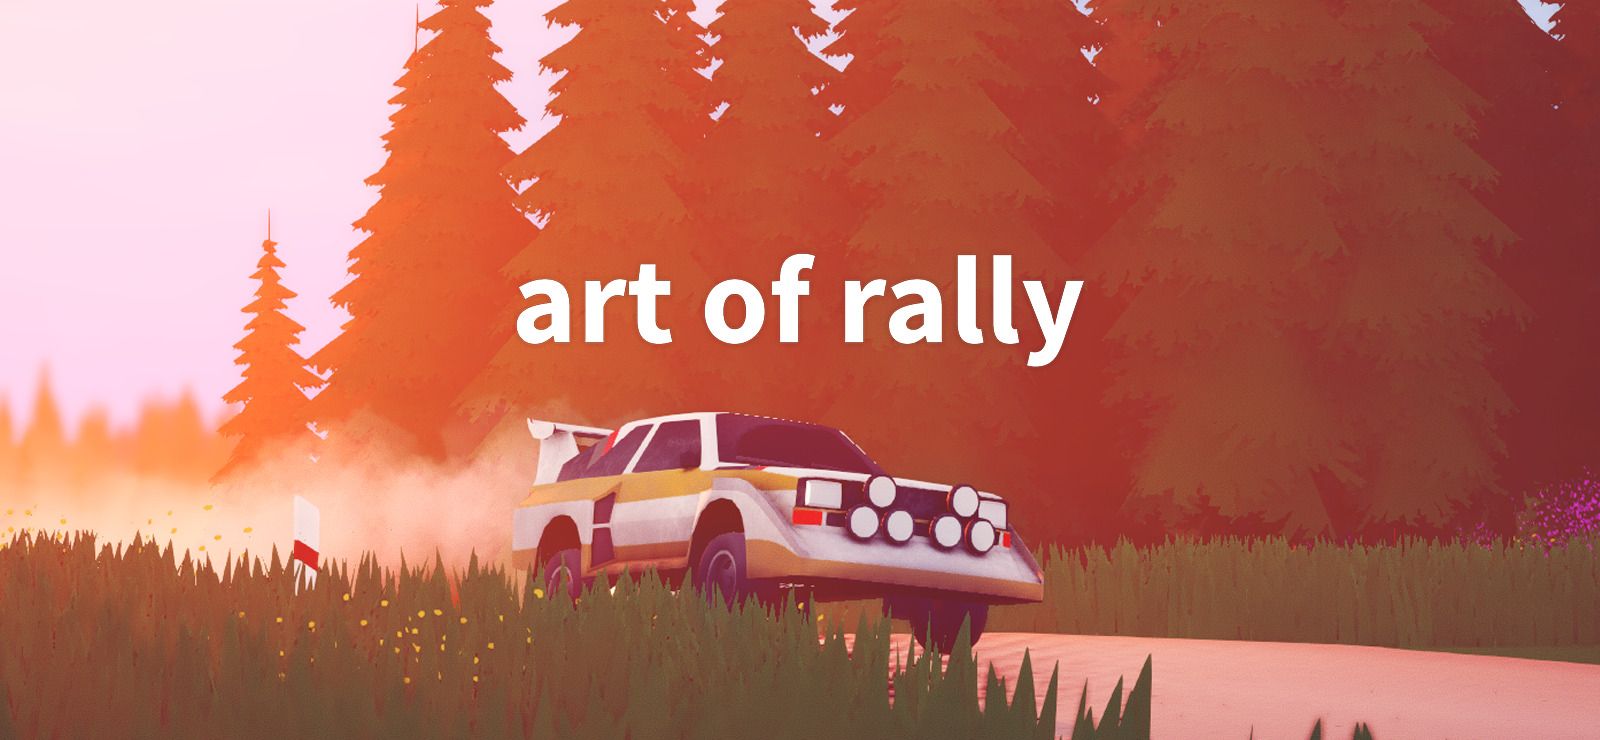 art of rally sign in